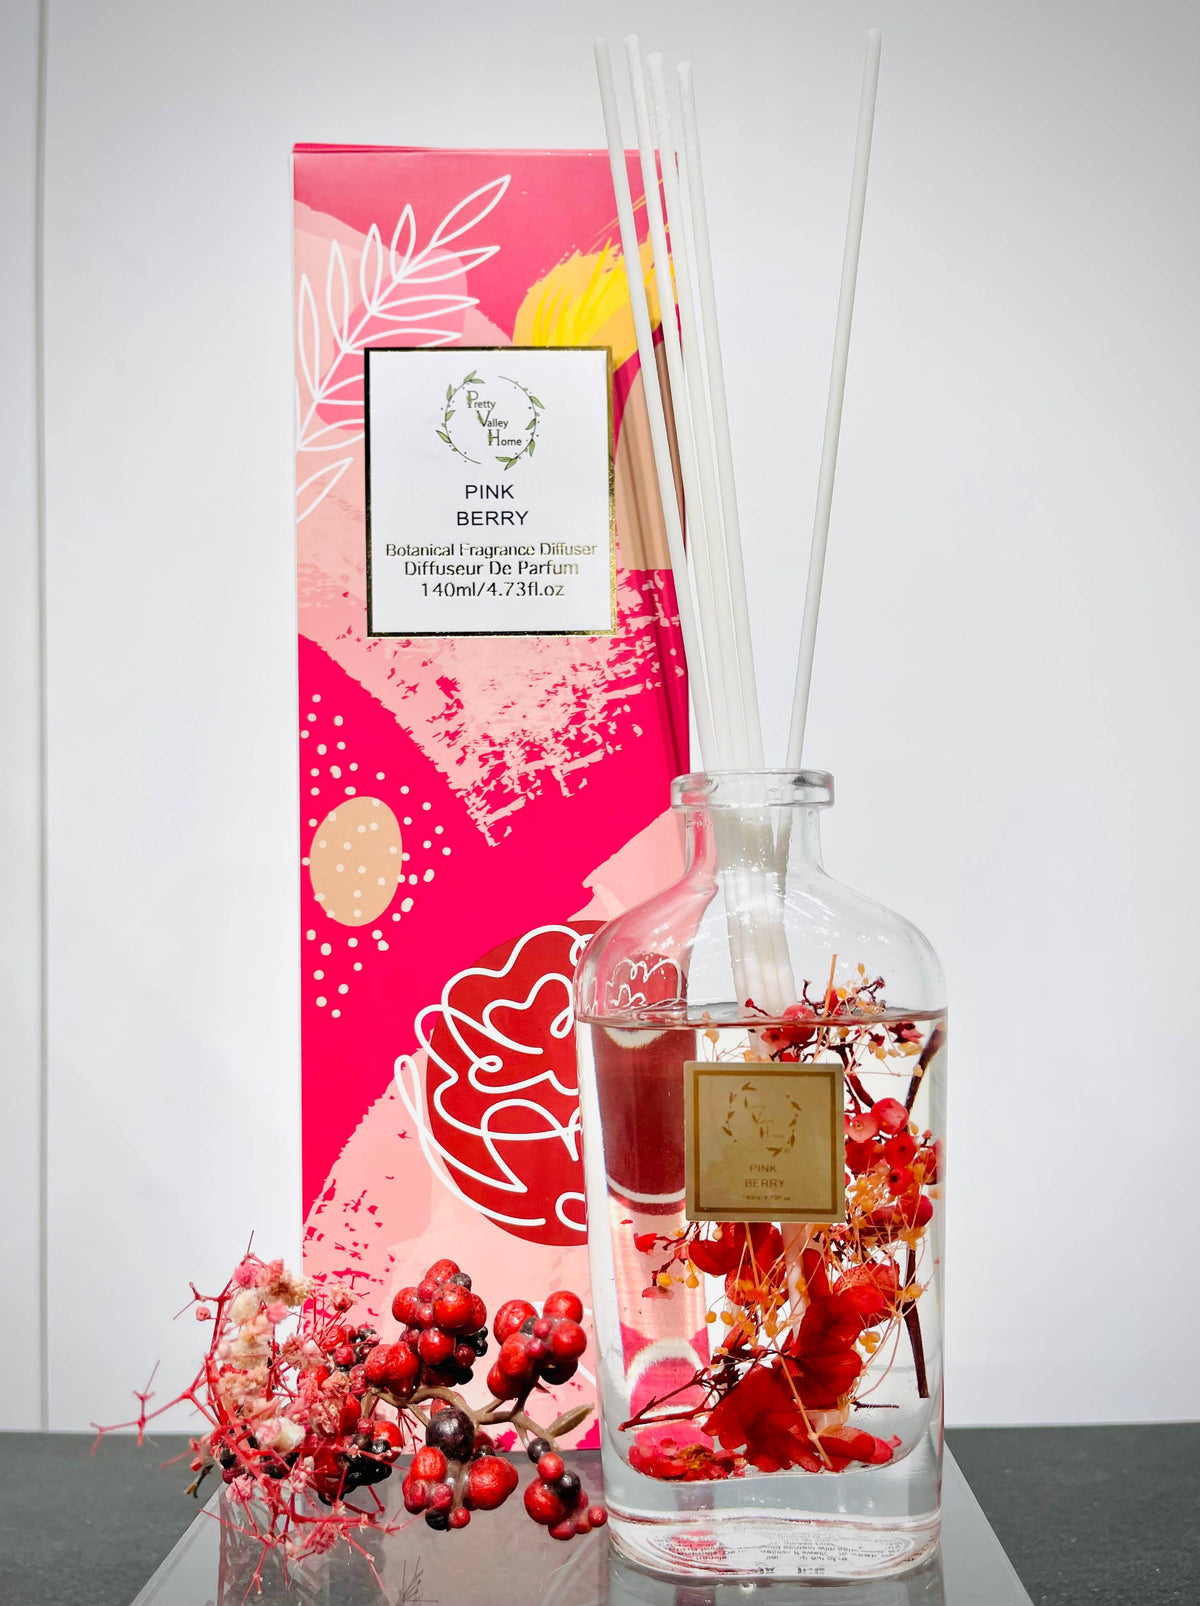 Botanical Reed Diffuser - Pink Berry